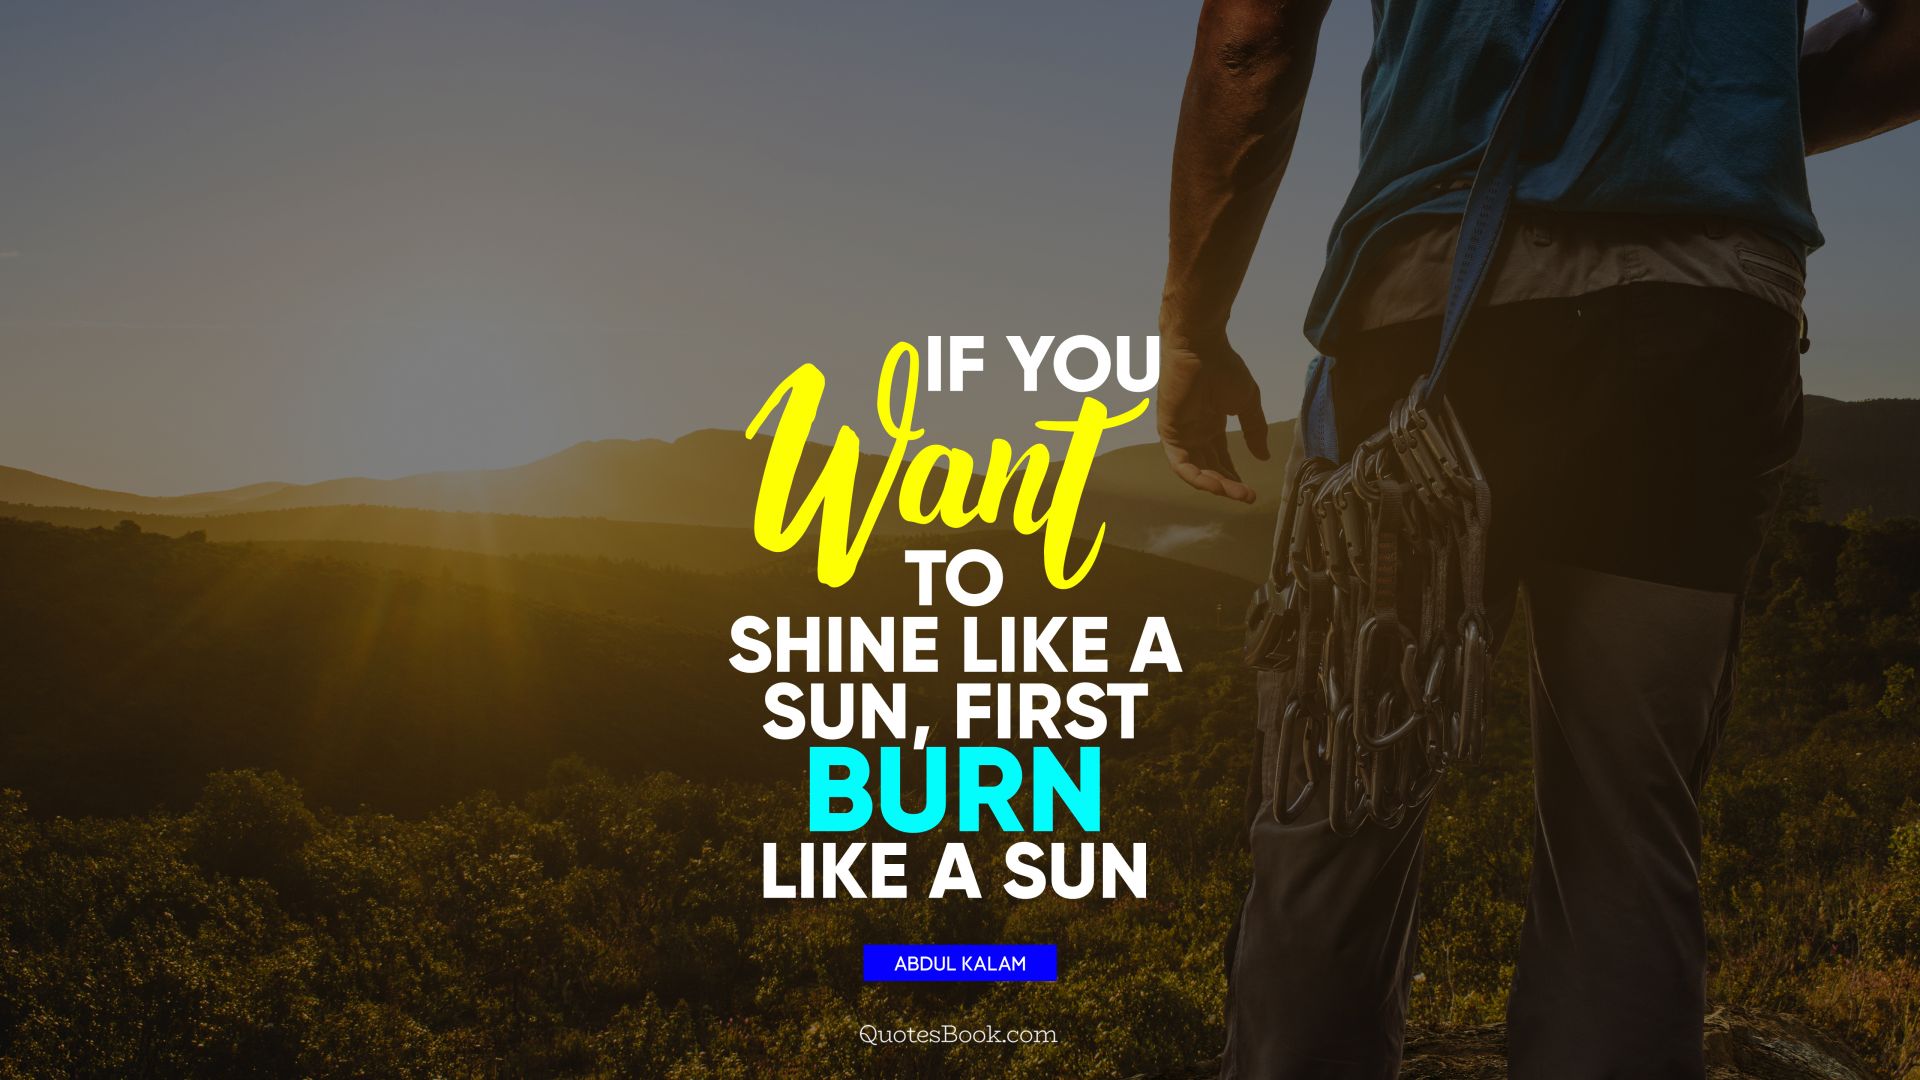 If you want to shine like a sun, first burn like a sun. - Quote by Abdul Kalam